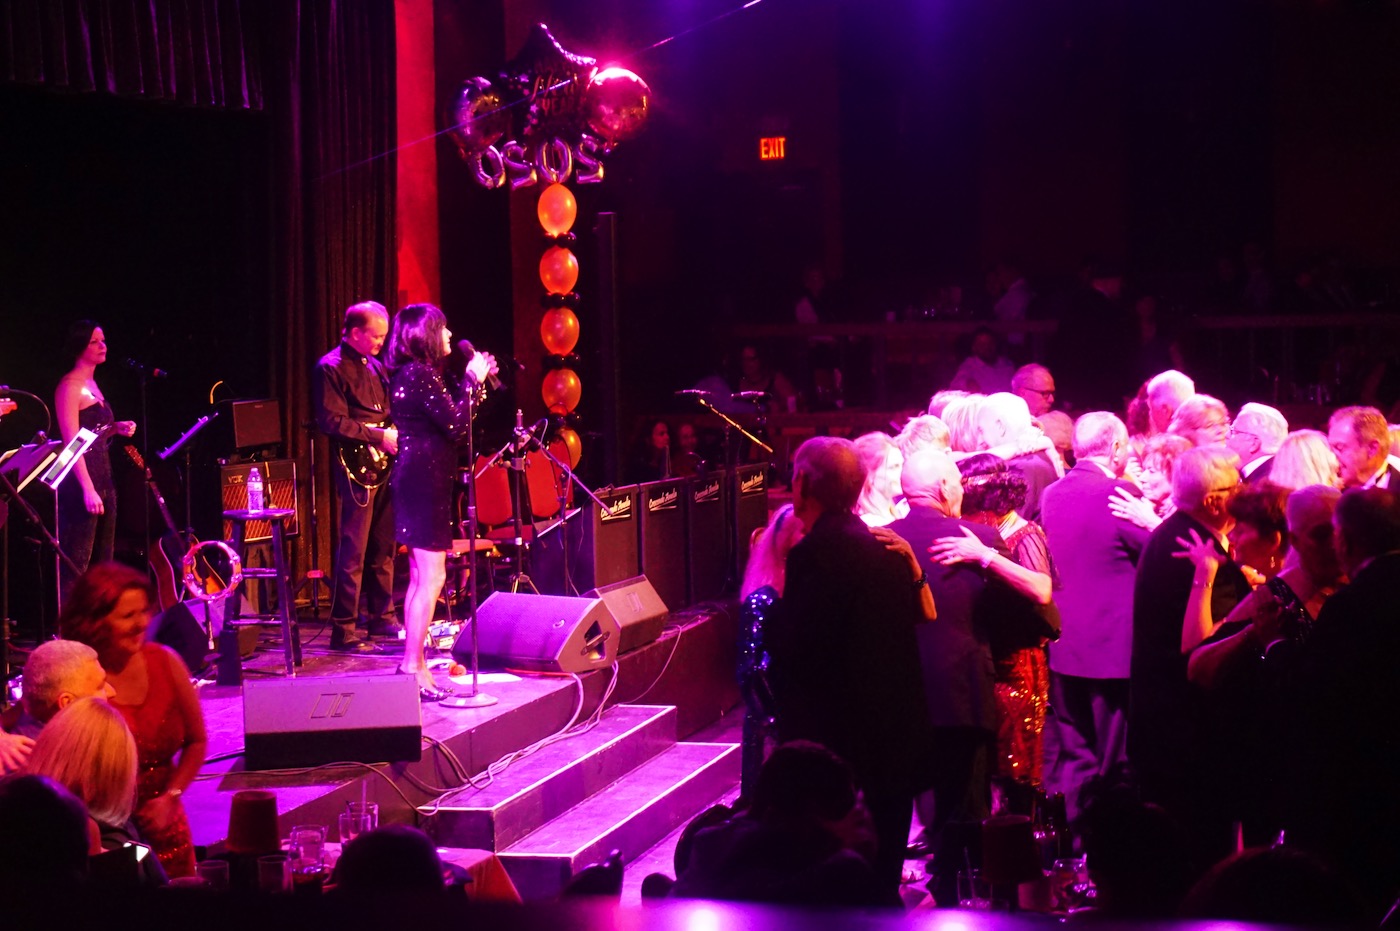 New Year's Eve Gala was a Roar at Alhambra Theatre & Dining